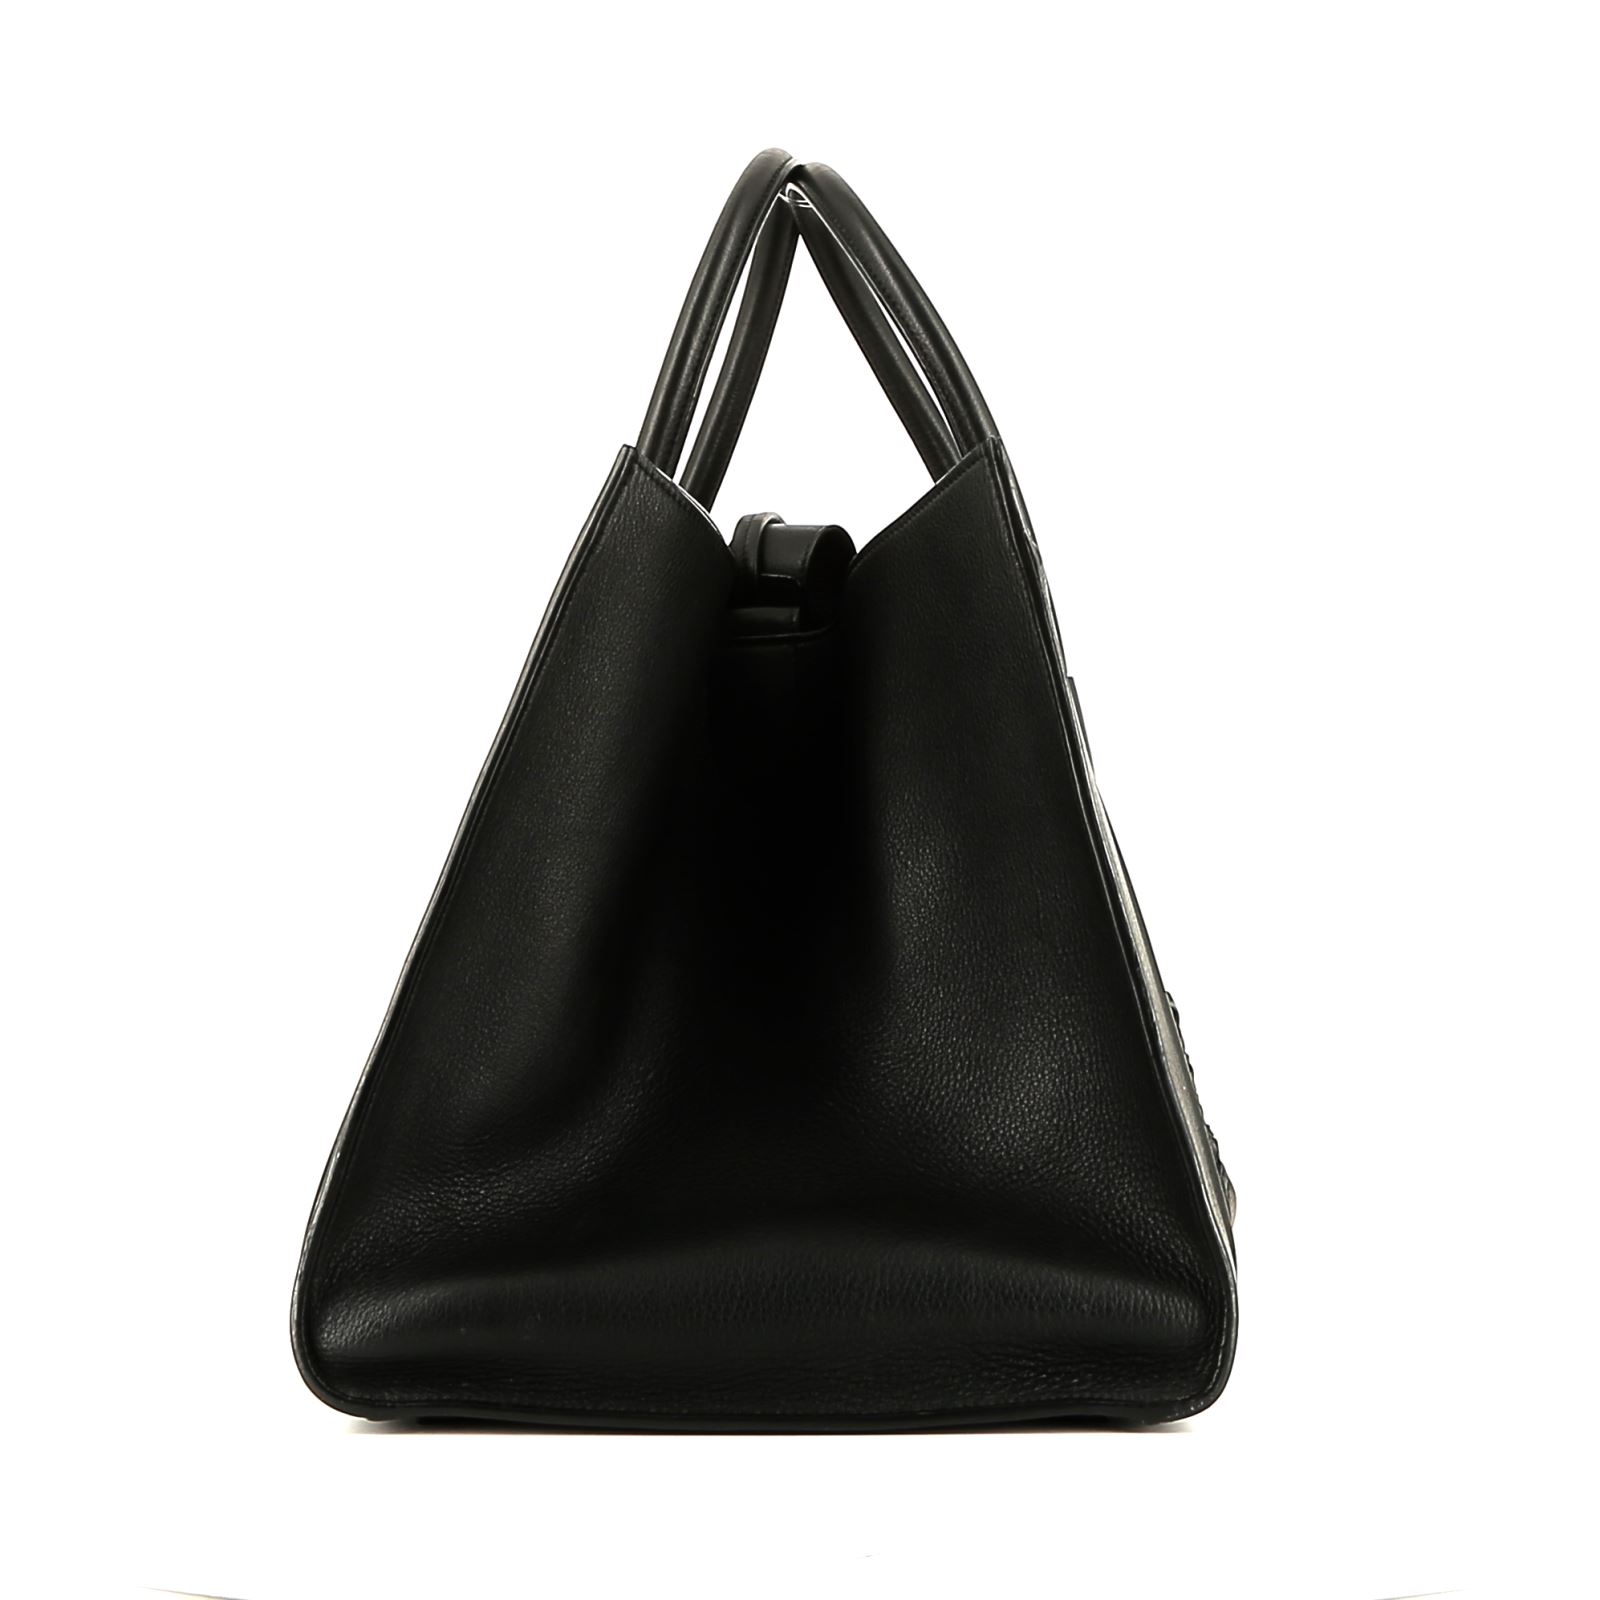 Cabas Phantom Shopping Bag In Black Grained Leather